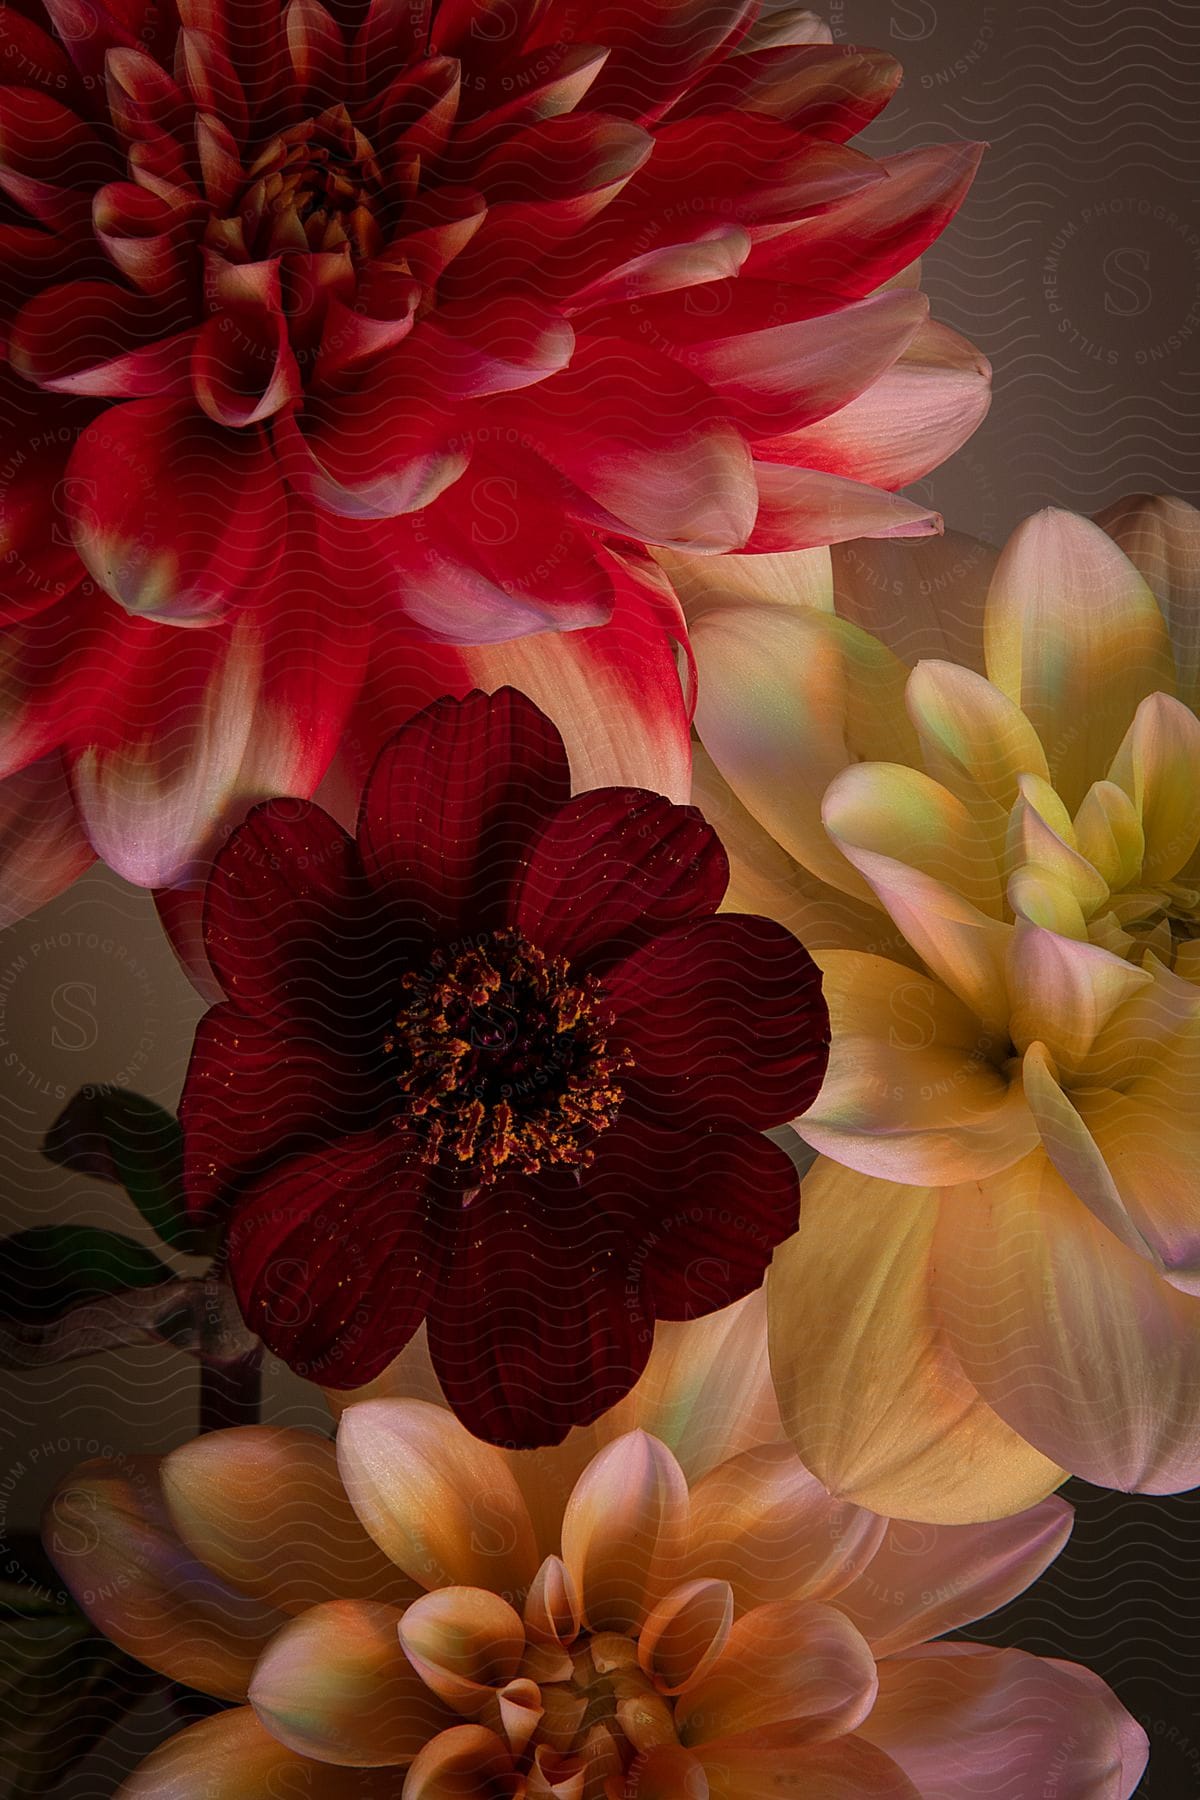 Close-up of flowers, with a large red and white dahlia, a dark red flower, and soft yellow petals in the composition.